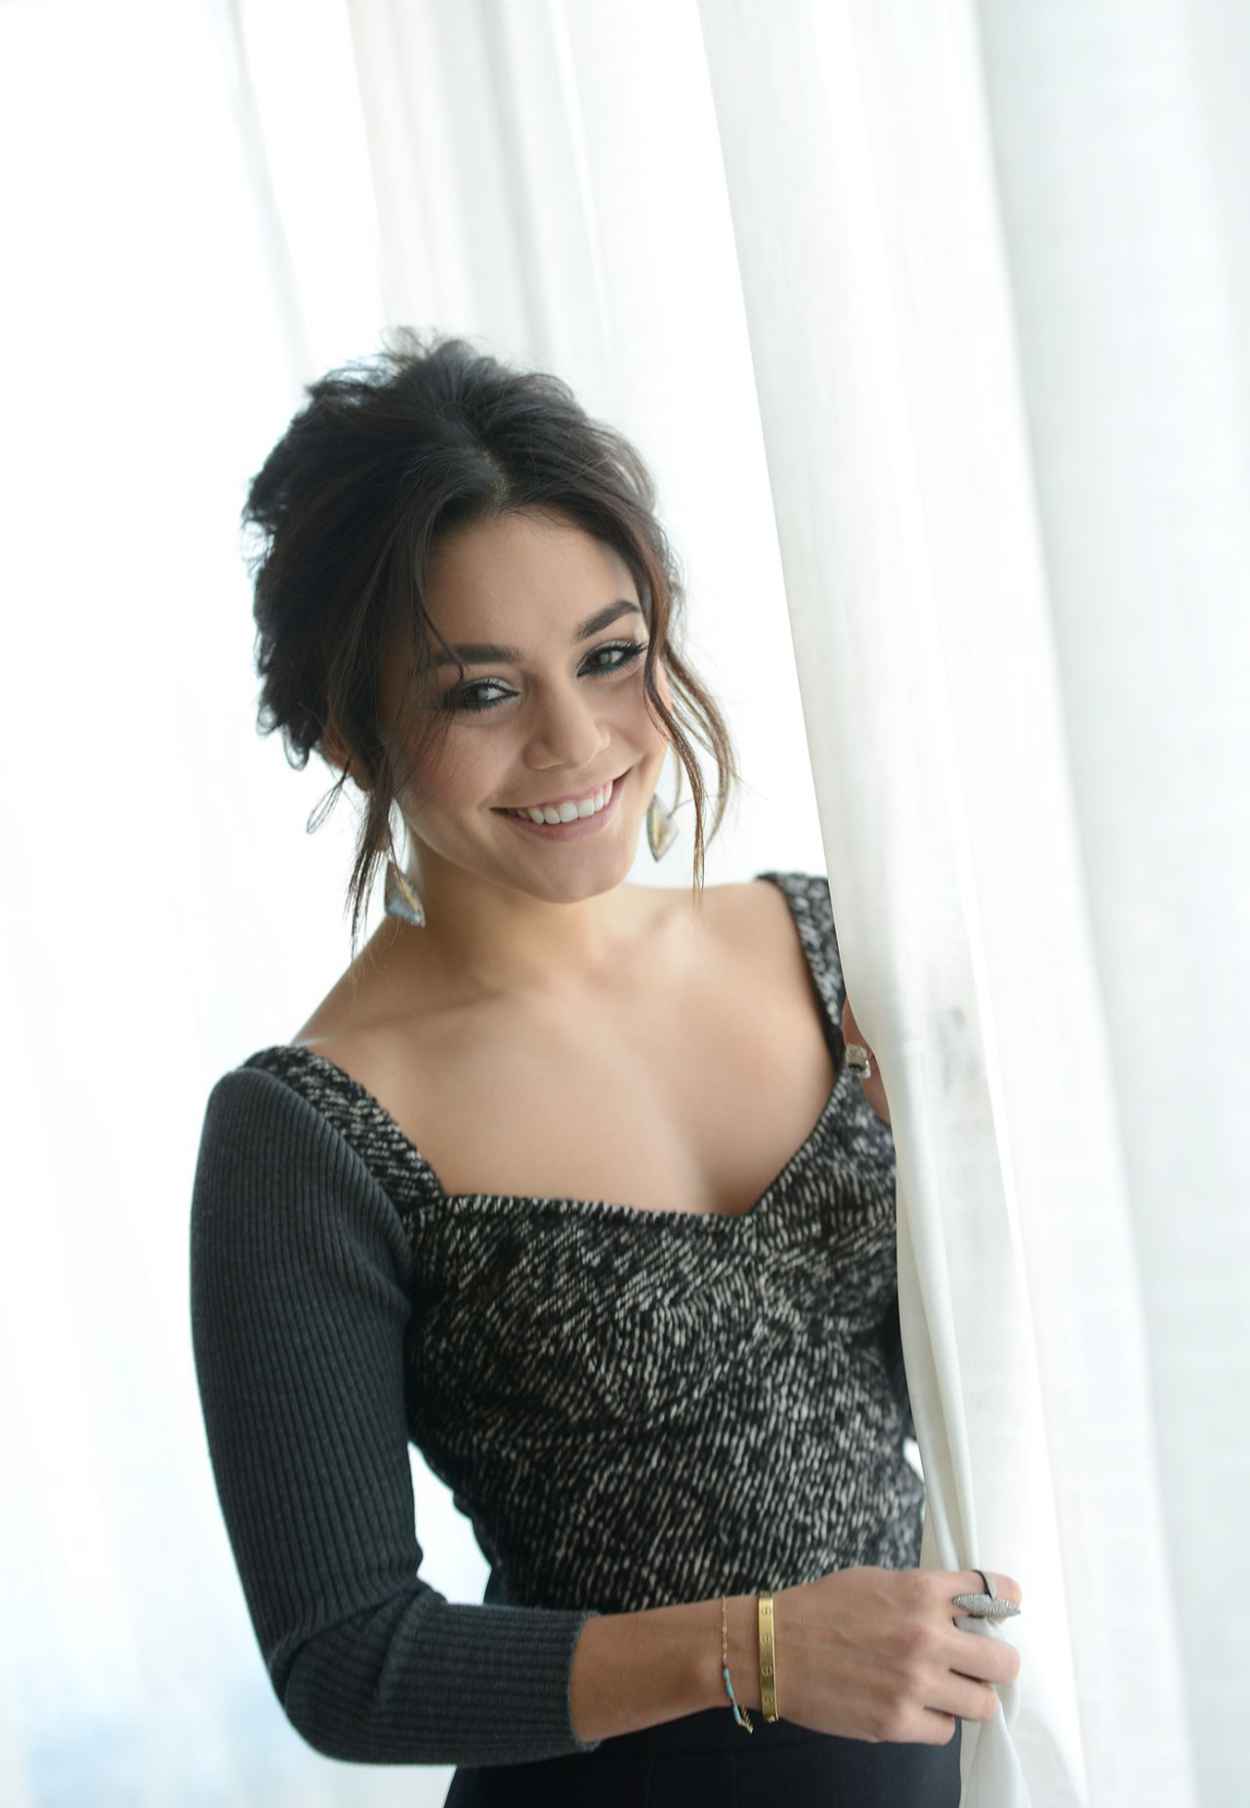 Vanessa Hudgens - Photoshoot by Jack Gruber for USA Today 2015-1